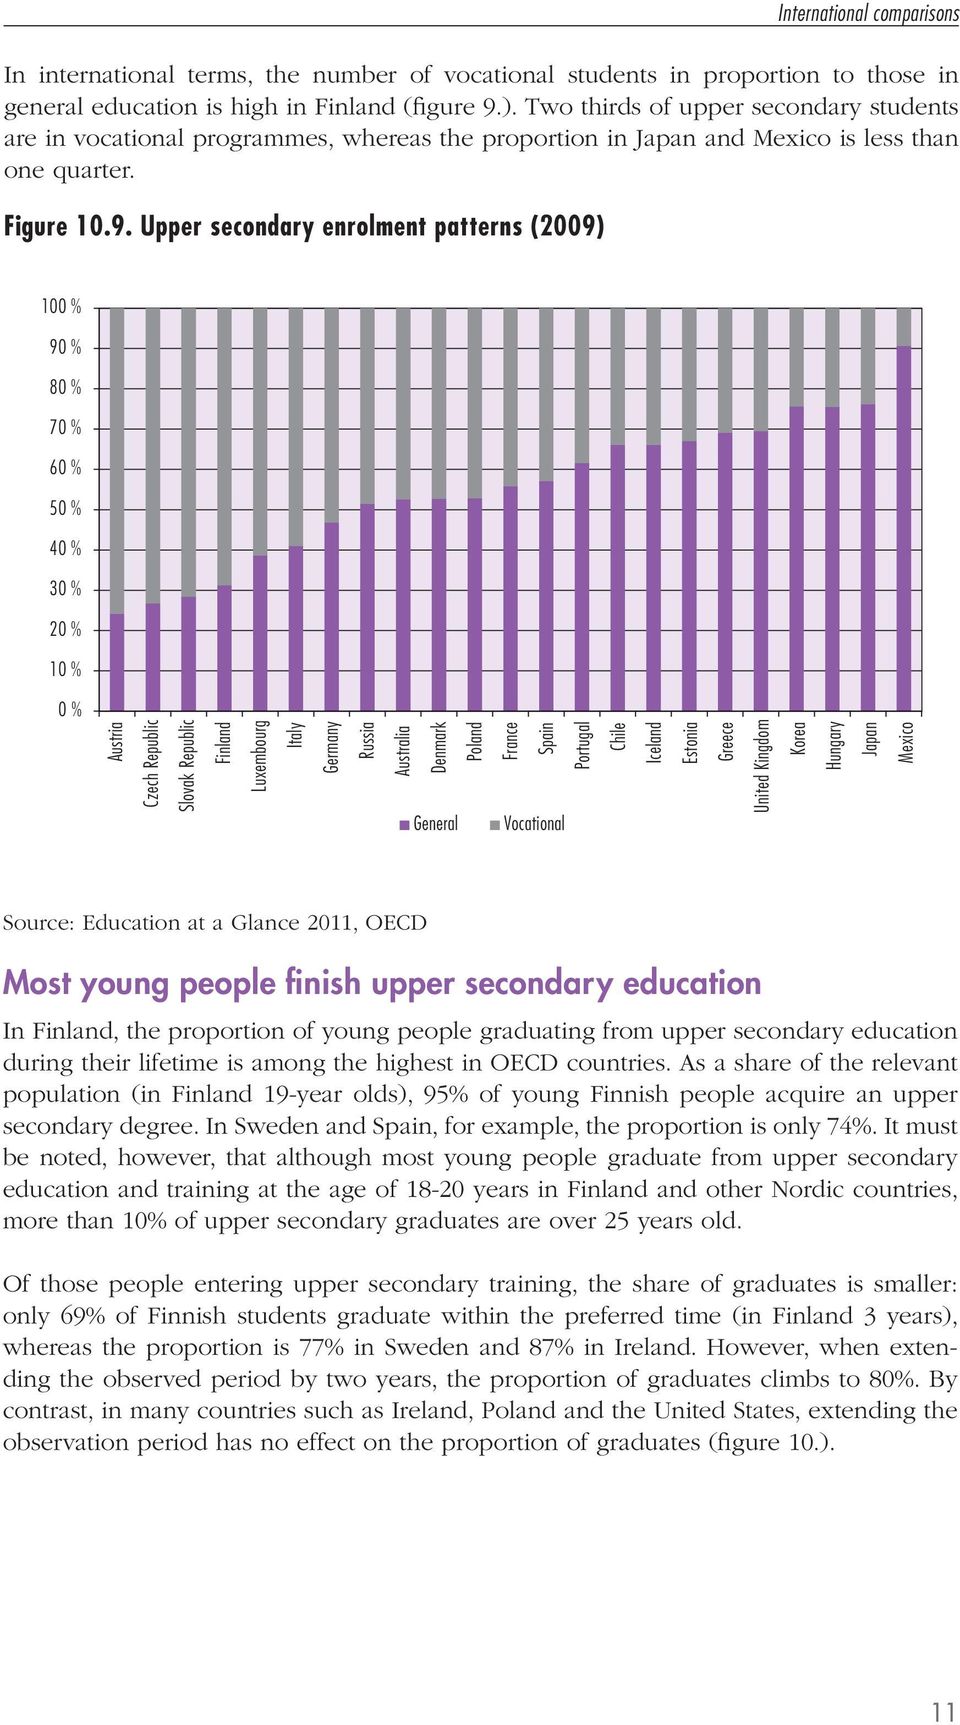 Upper secondary enrolment patterns (2009) International comparisons 100 % 90 % 80 % 70 % 60 % 50 % 40 % 30 % 20 % 10 % 0 % Slovak Republic Luxembourg Russia General Portugal Vocational Chile Greece